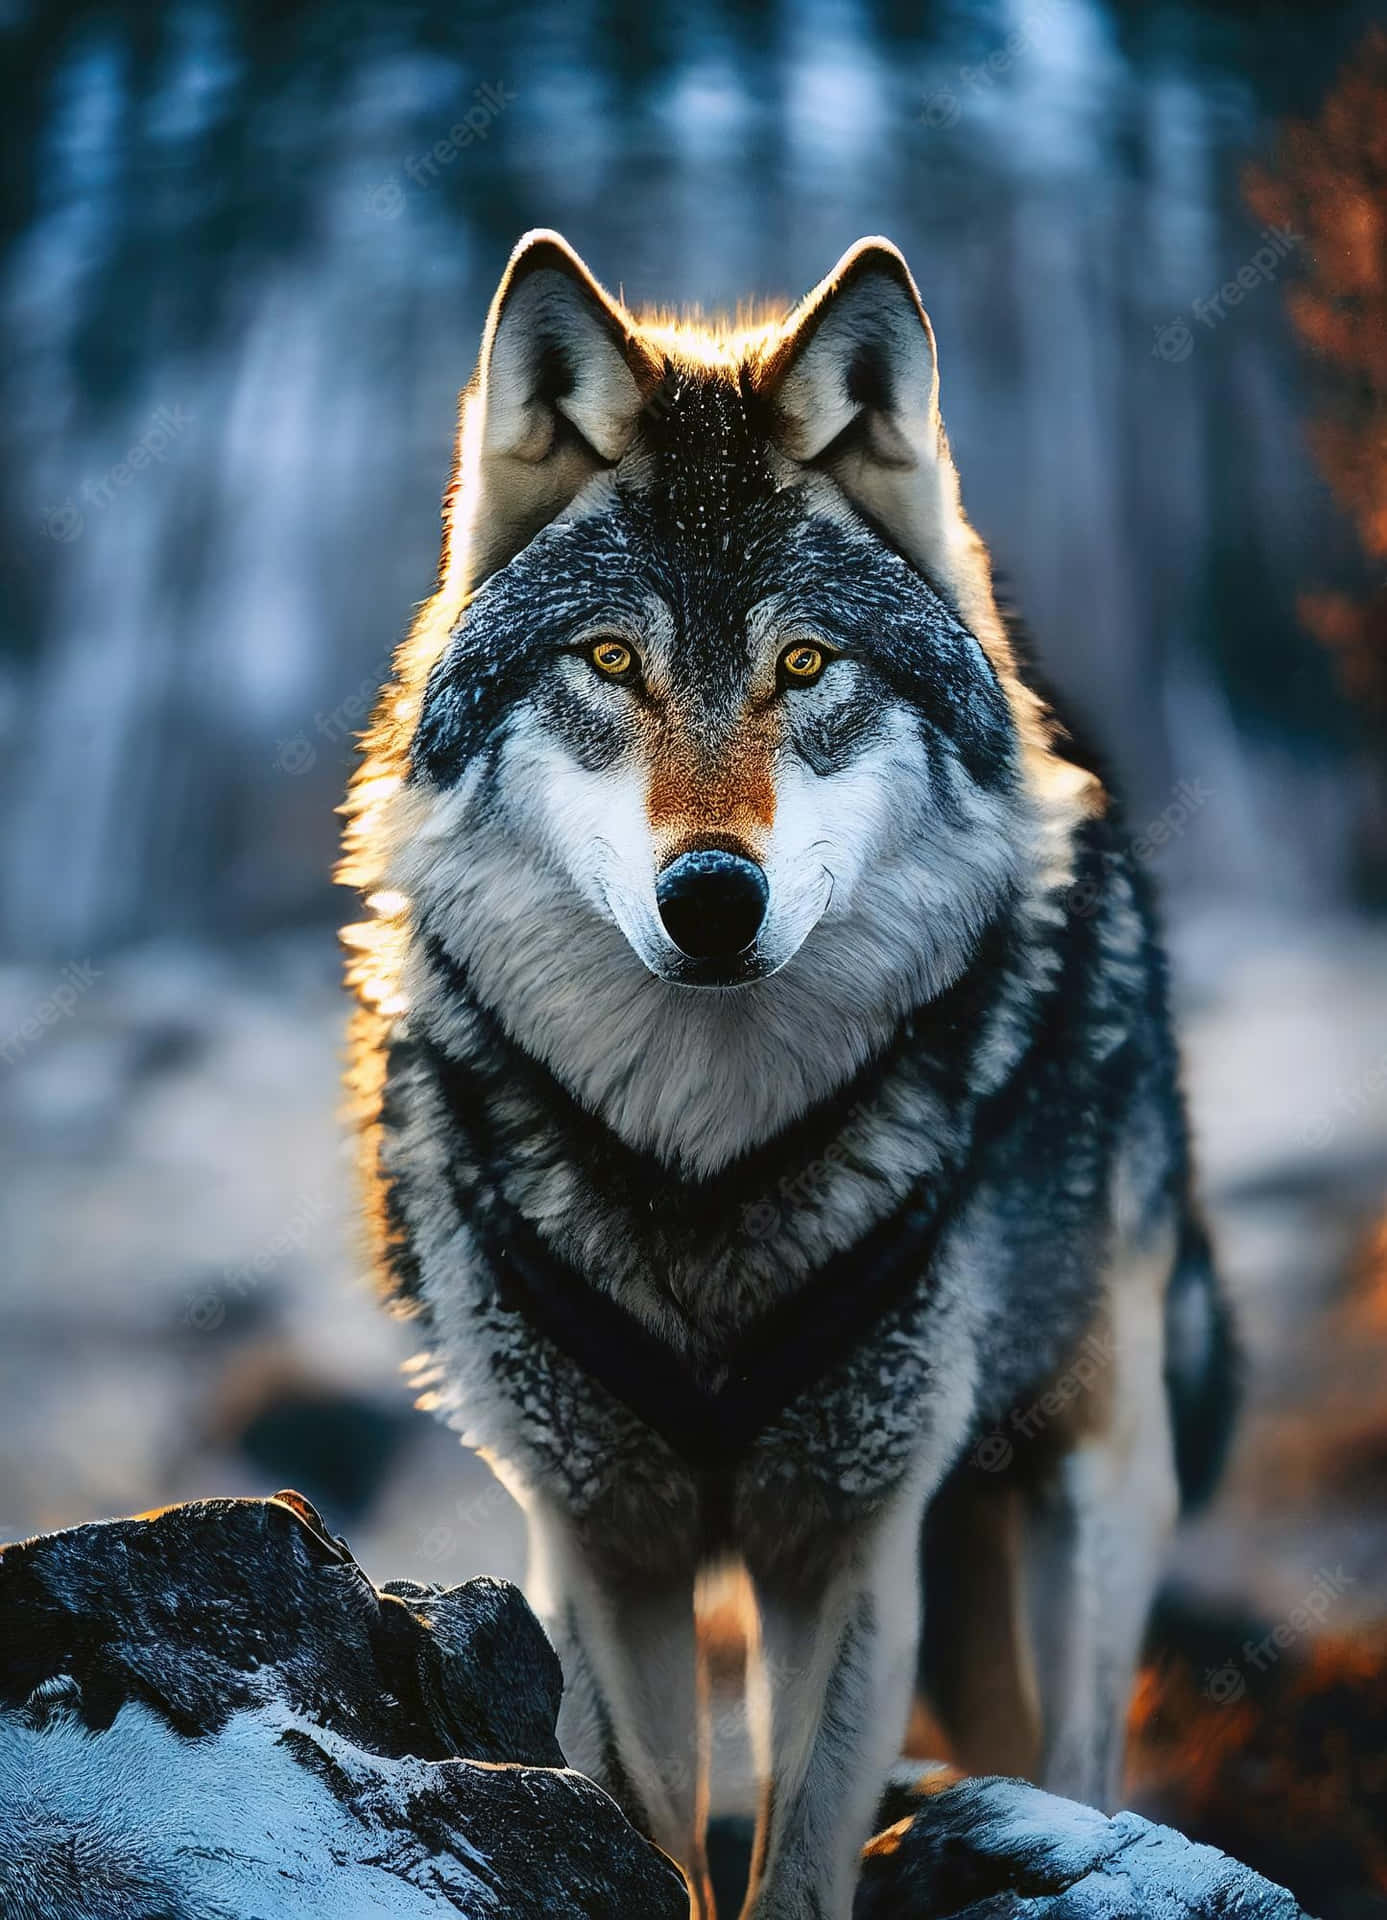 Caption: Majestic Wolf in the Wild Wallpaper